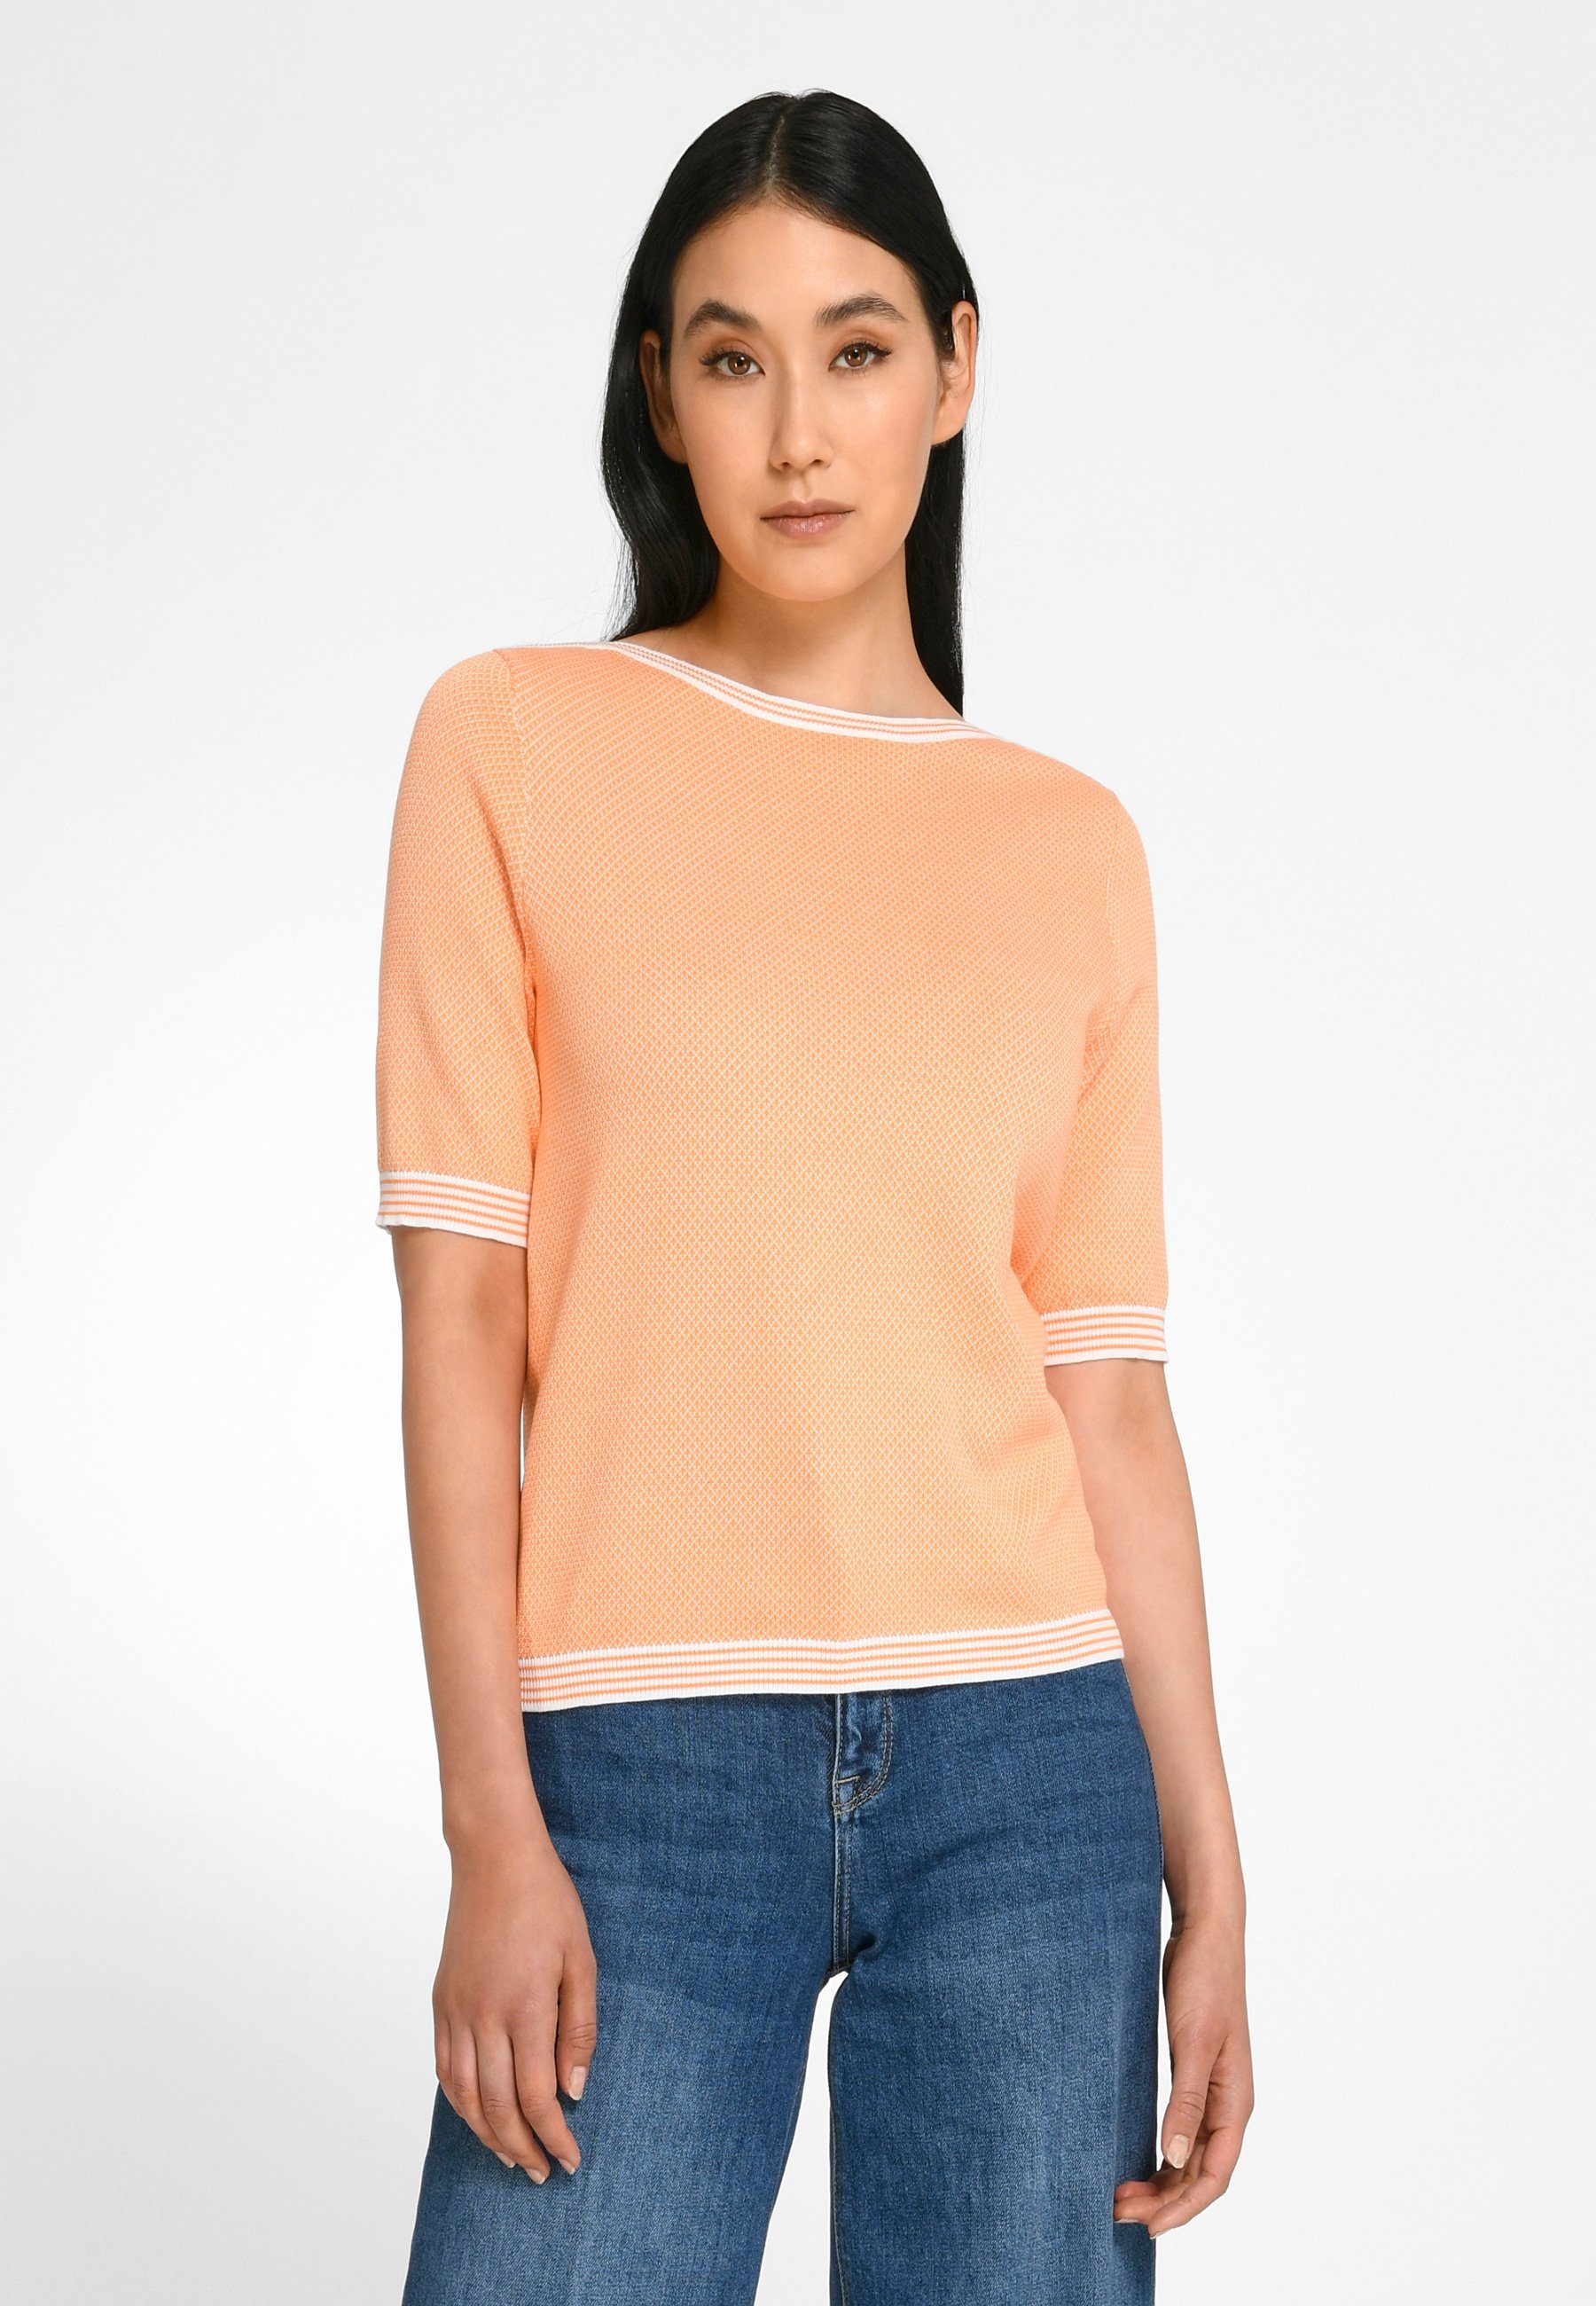 Hahn Peter apricot Cotton Strickpullover